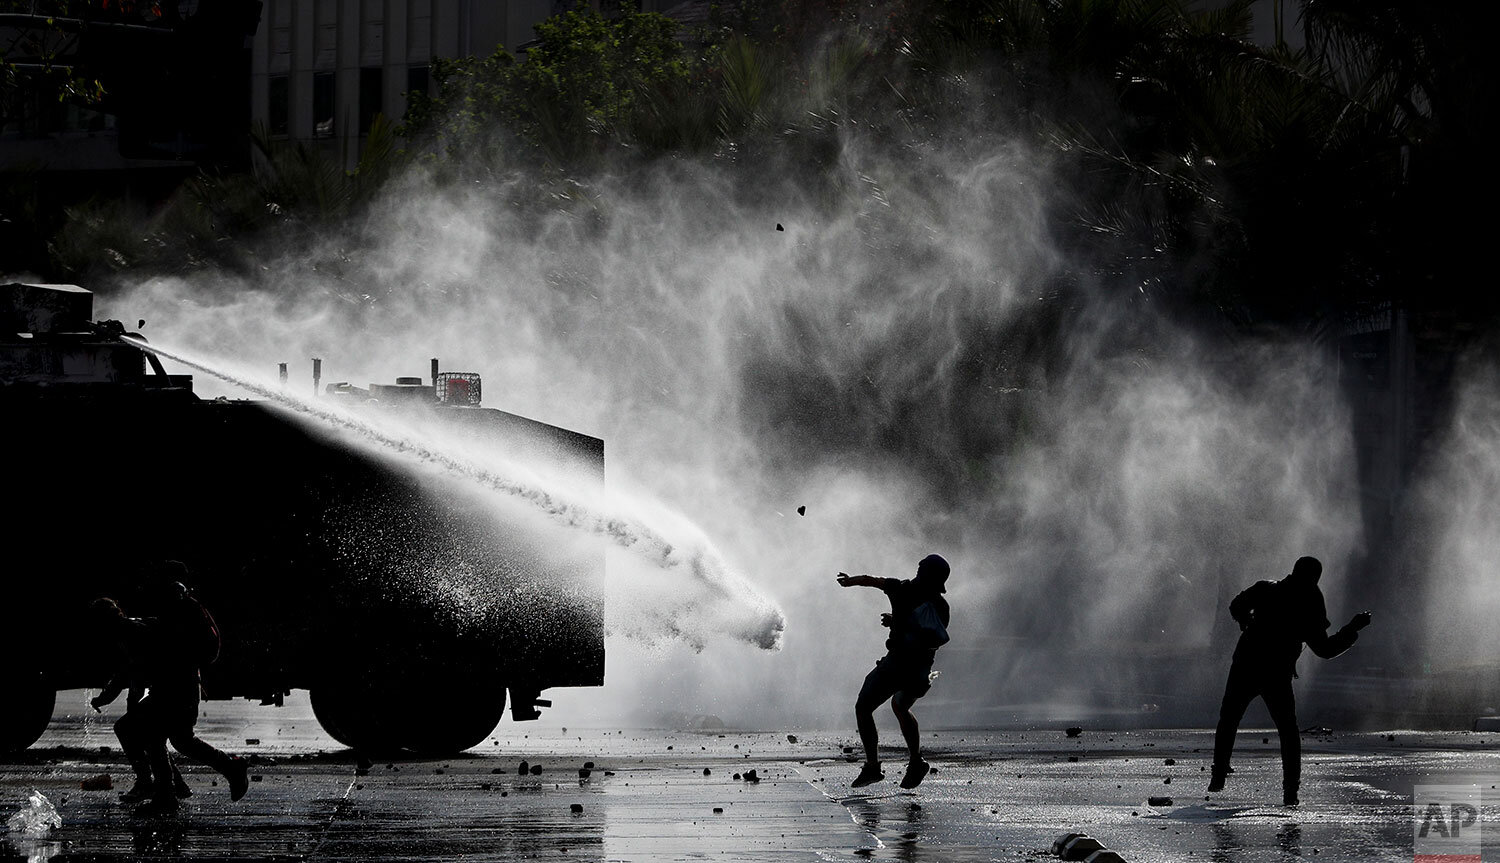  Demonstrators clash with a police water cannon during an anti-government protest in Santiago, Tuesday, Nov. 5, 2019. Chileans have been taking to the streets and clashing with the police to demand better social services and an end to economic inequa